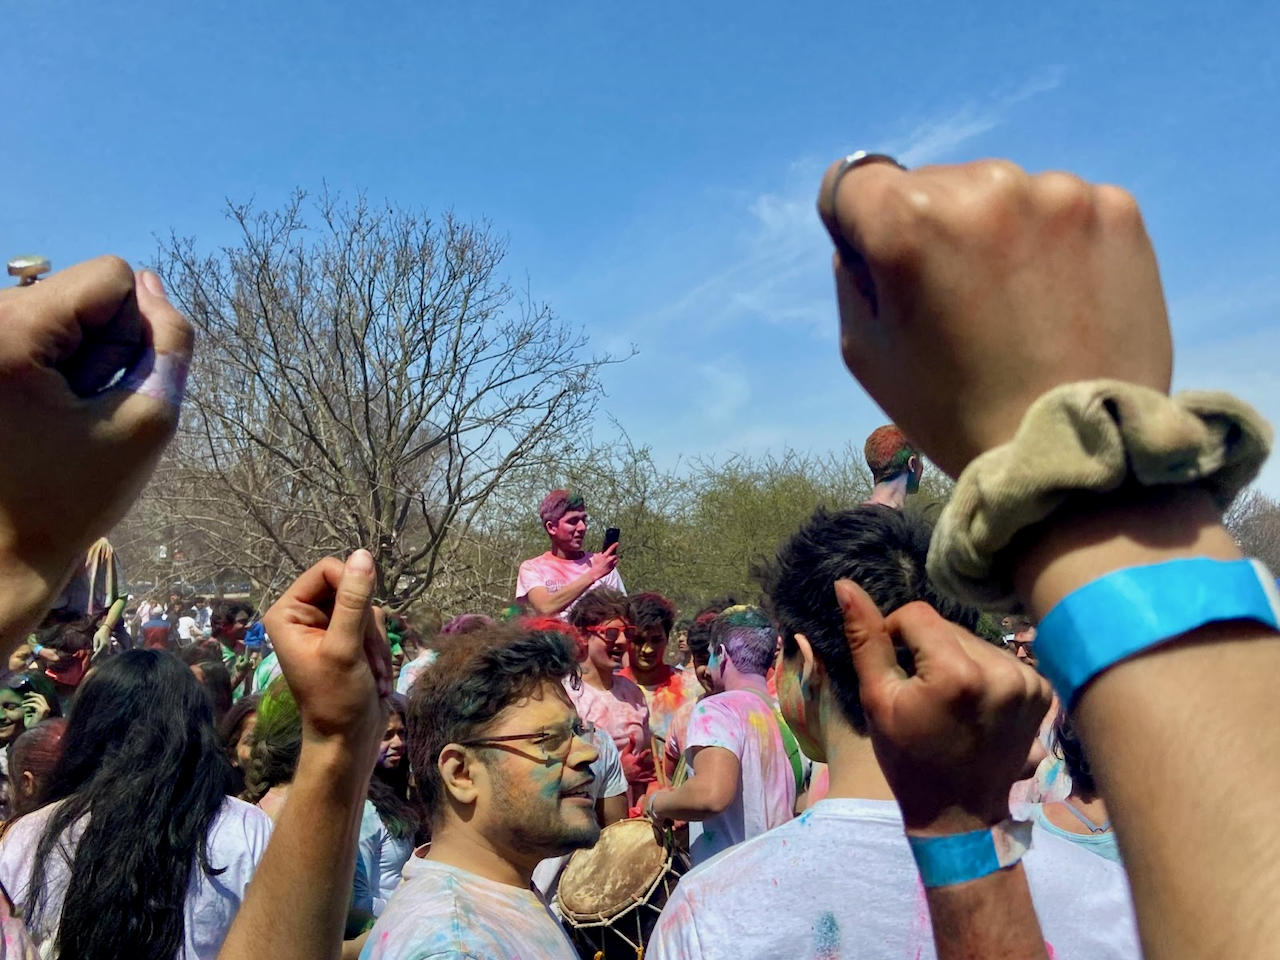 Students bang drums and pump their fists at the Holi celebration. Holi is a Hindu festival that celebrates the arrival of spring, among other themes. 